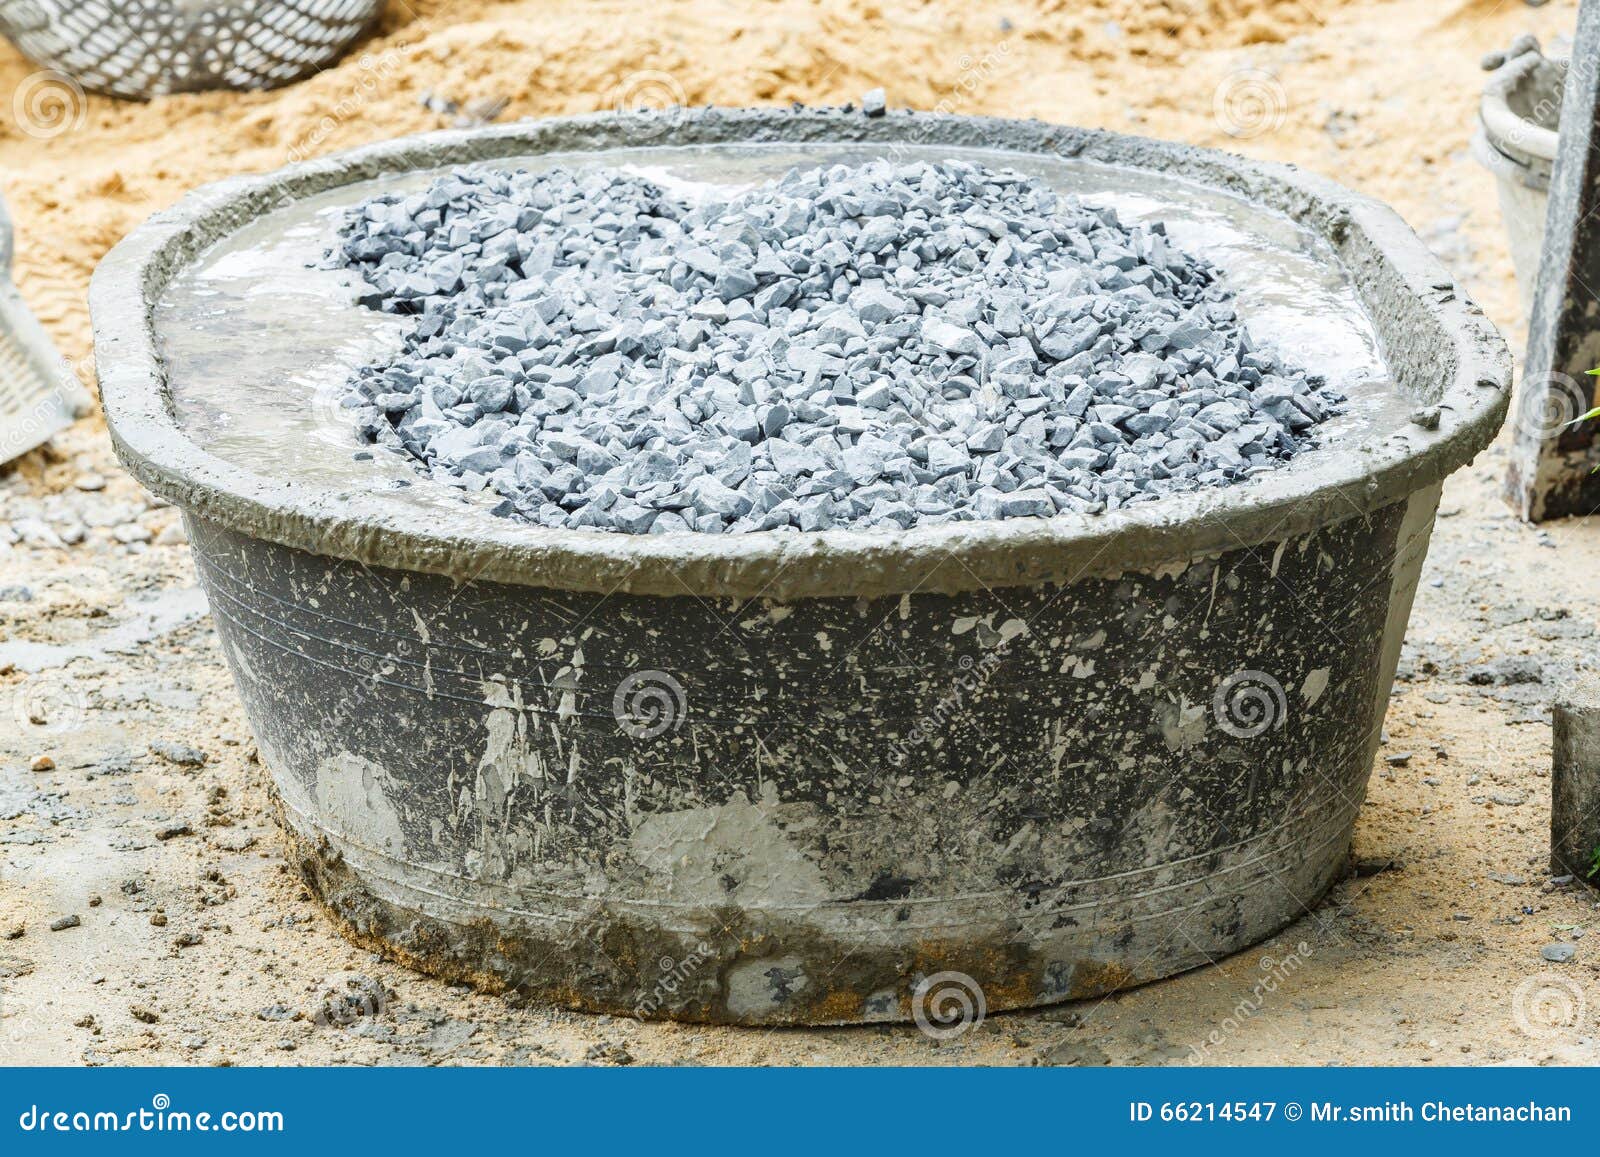 Concrete Mixing Tub Stock Image Image Of Trowel Blend